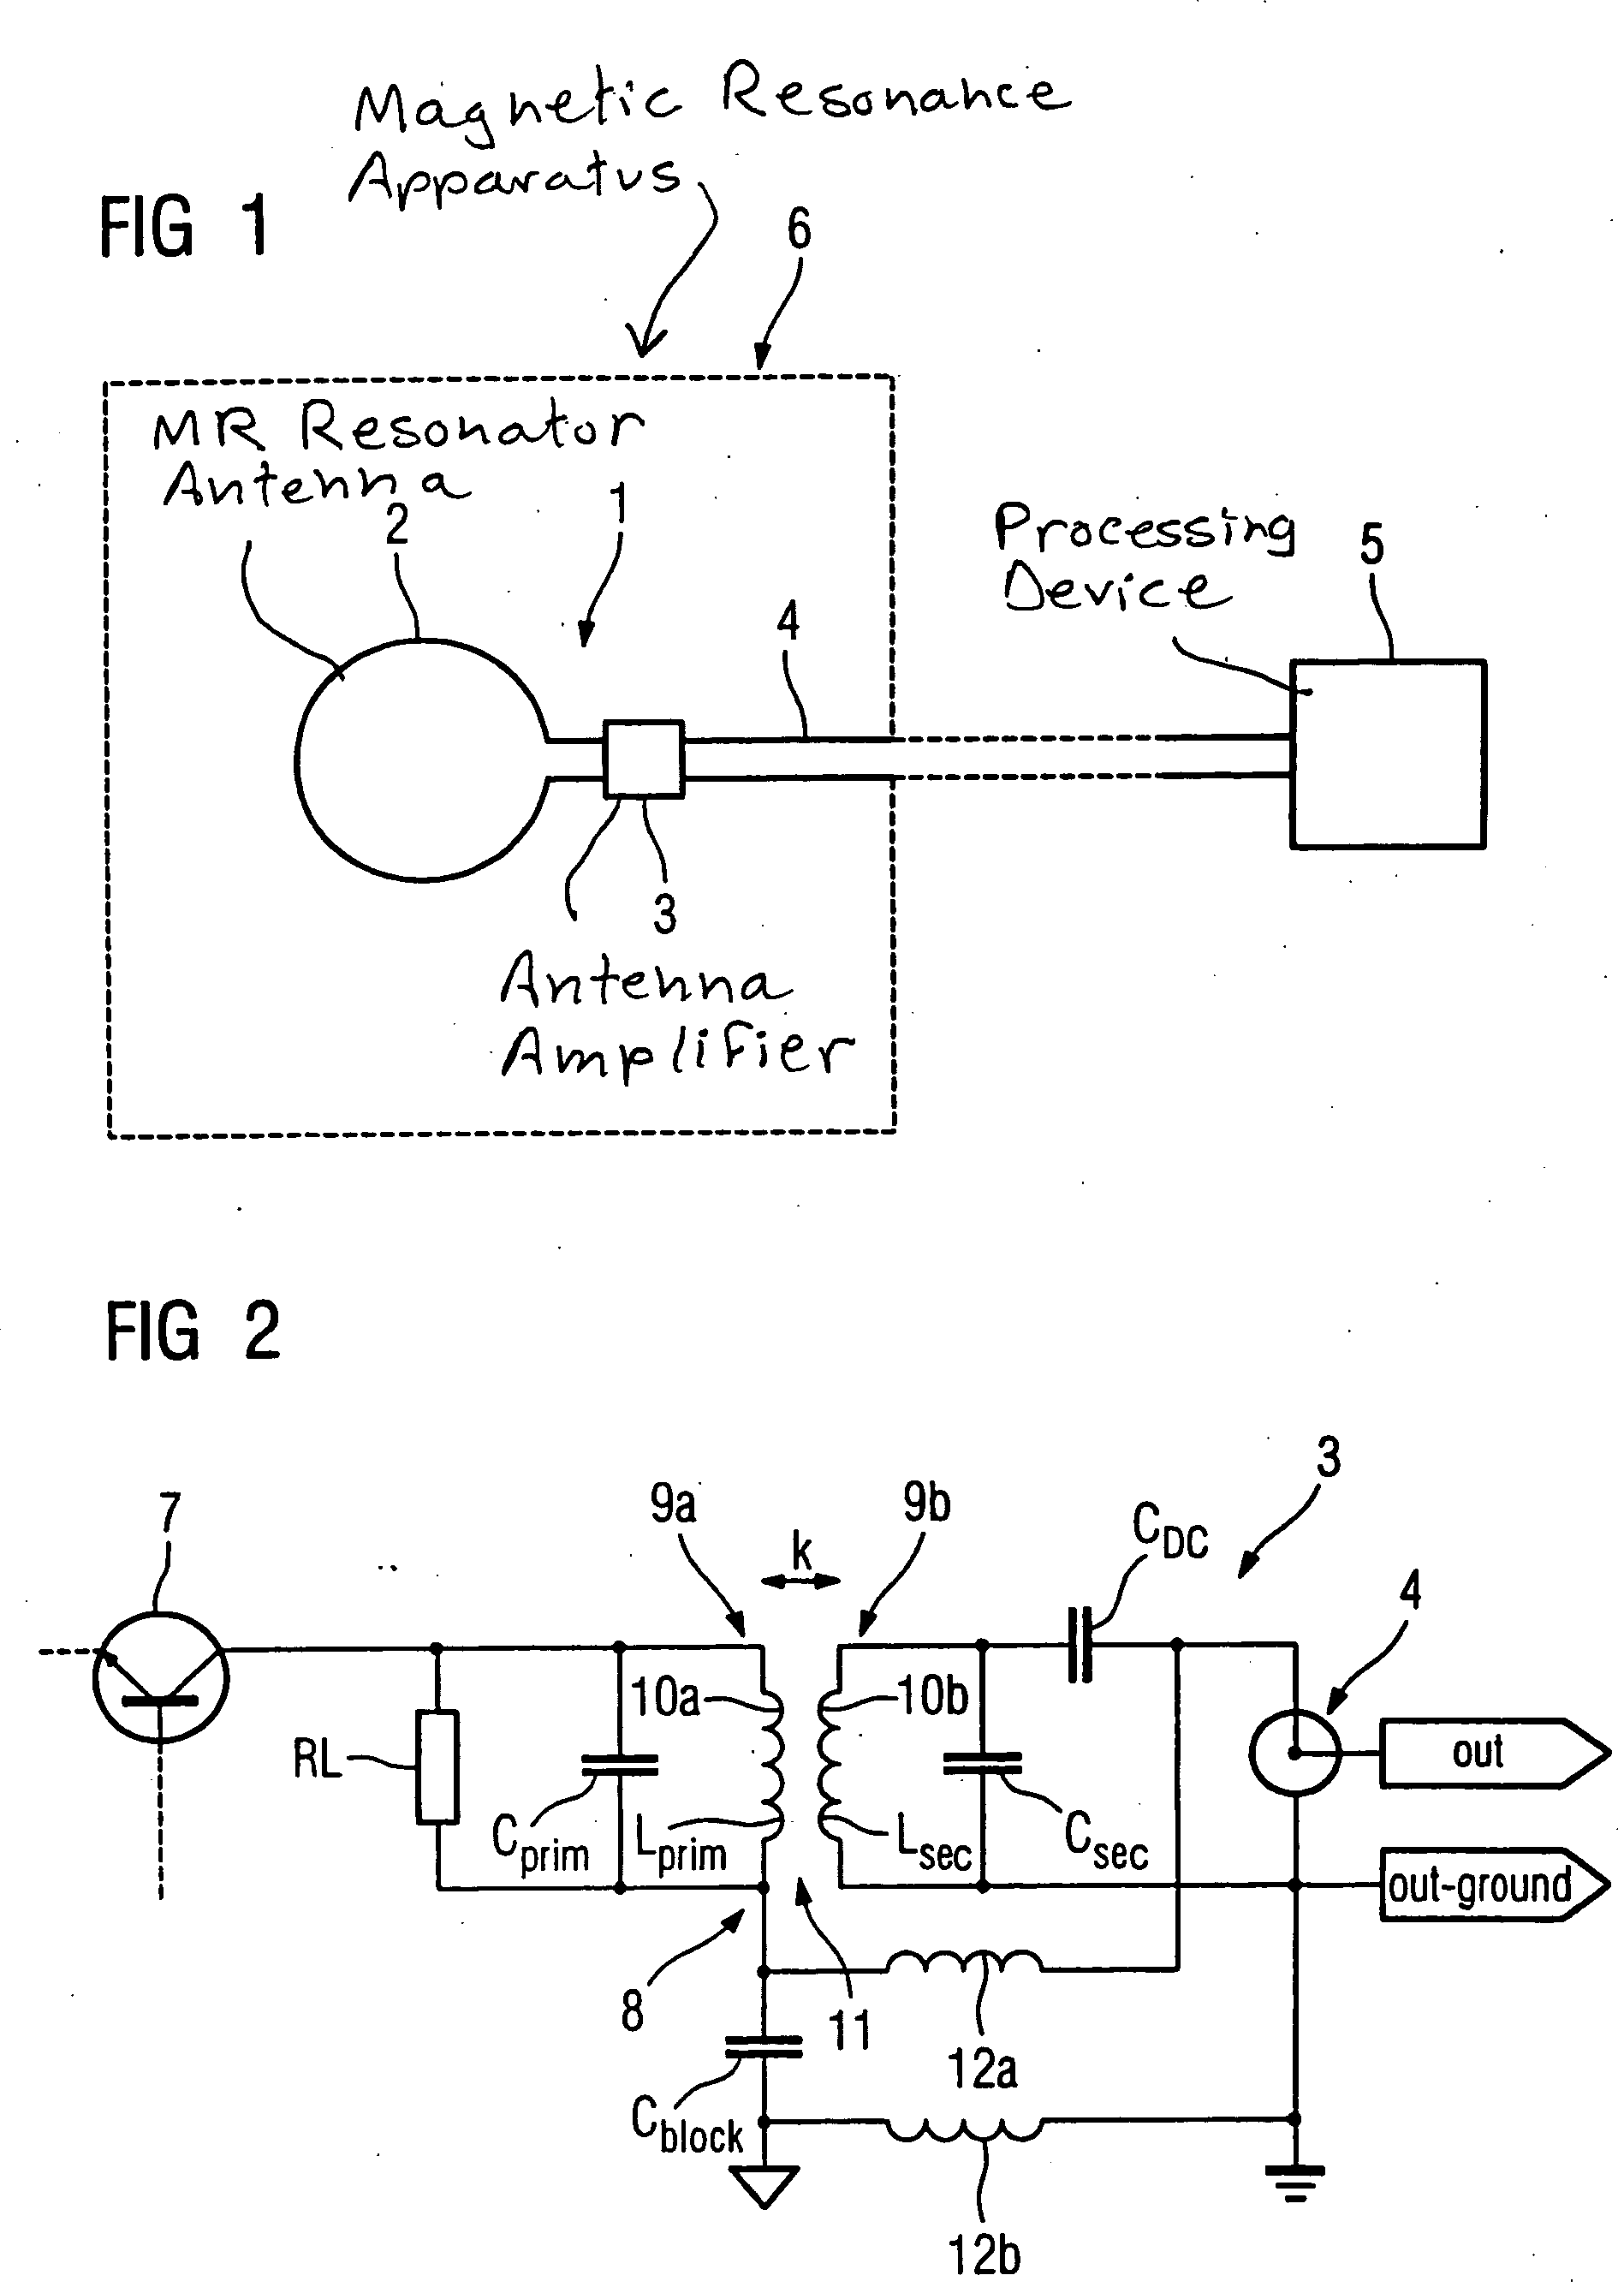 Antenna Amplifier, in particular for a magnetic resonance antenna